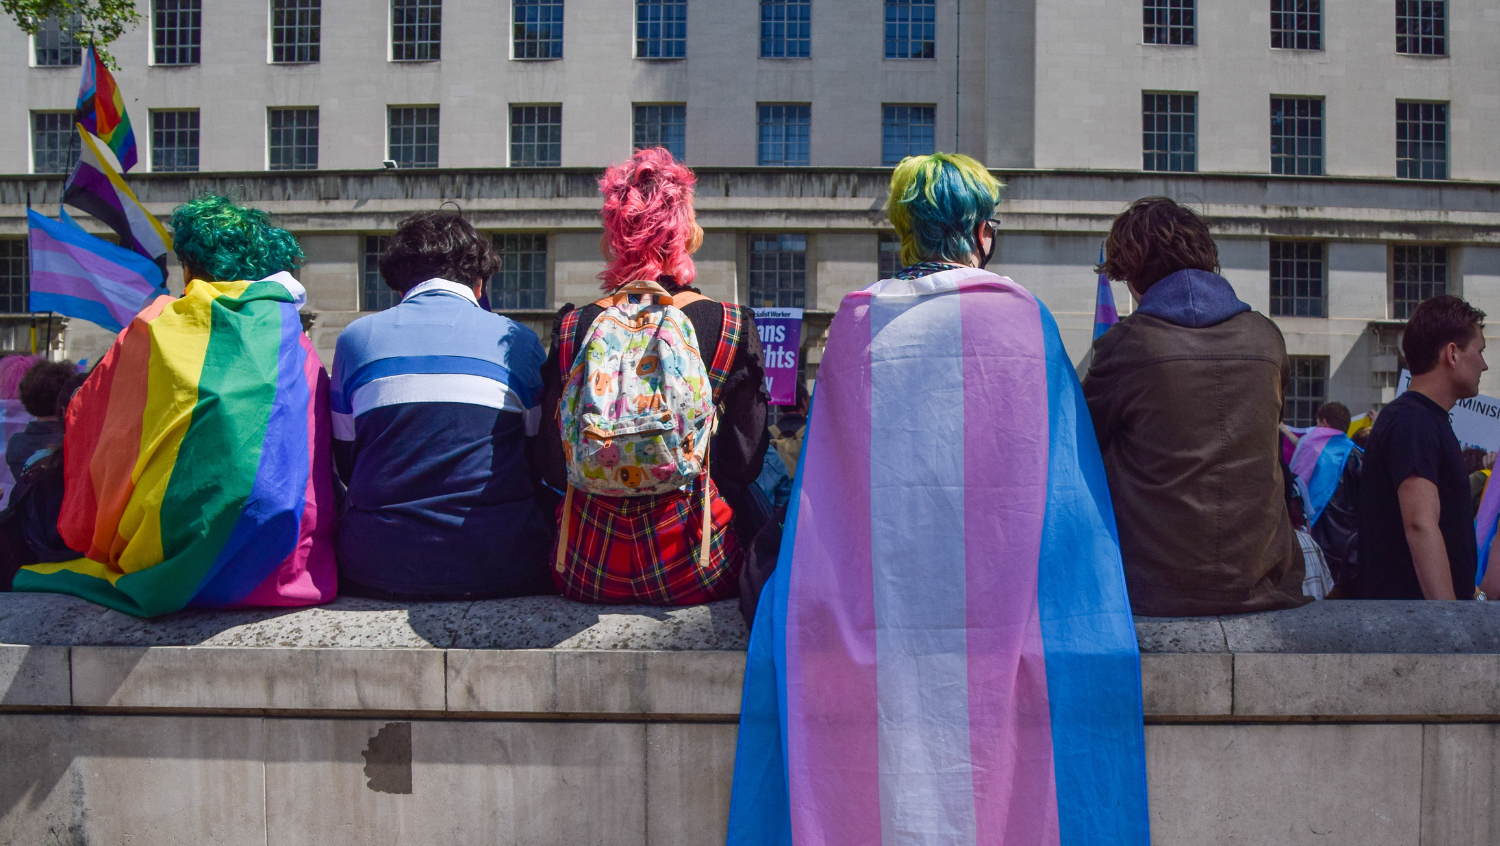 group of young people at a trans rights rally holding gender identity pride flags, as we see their backs